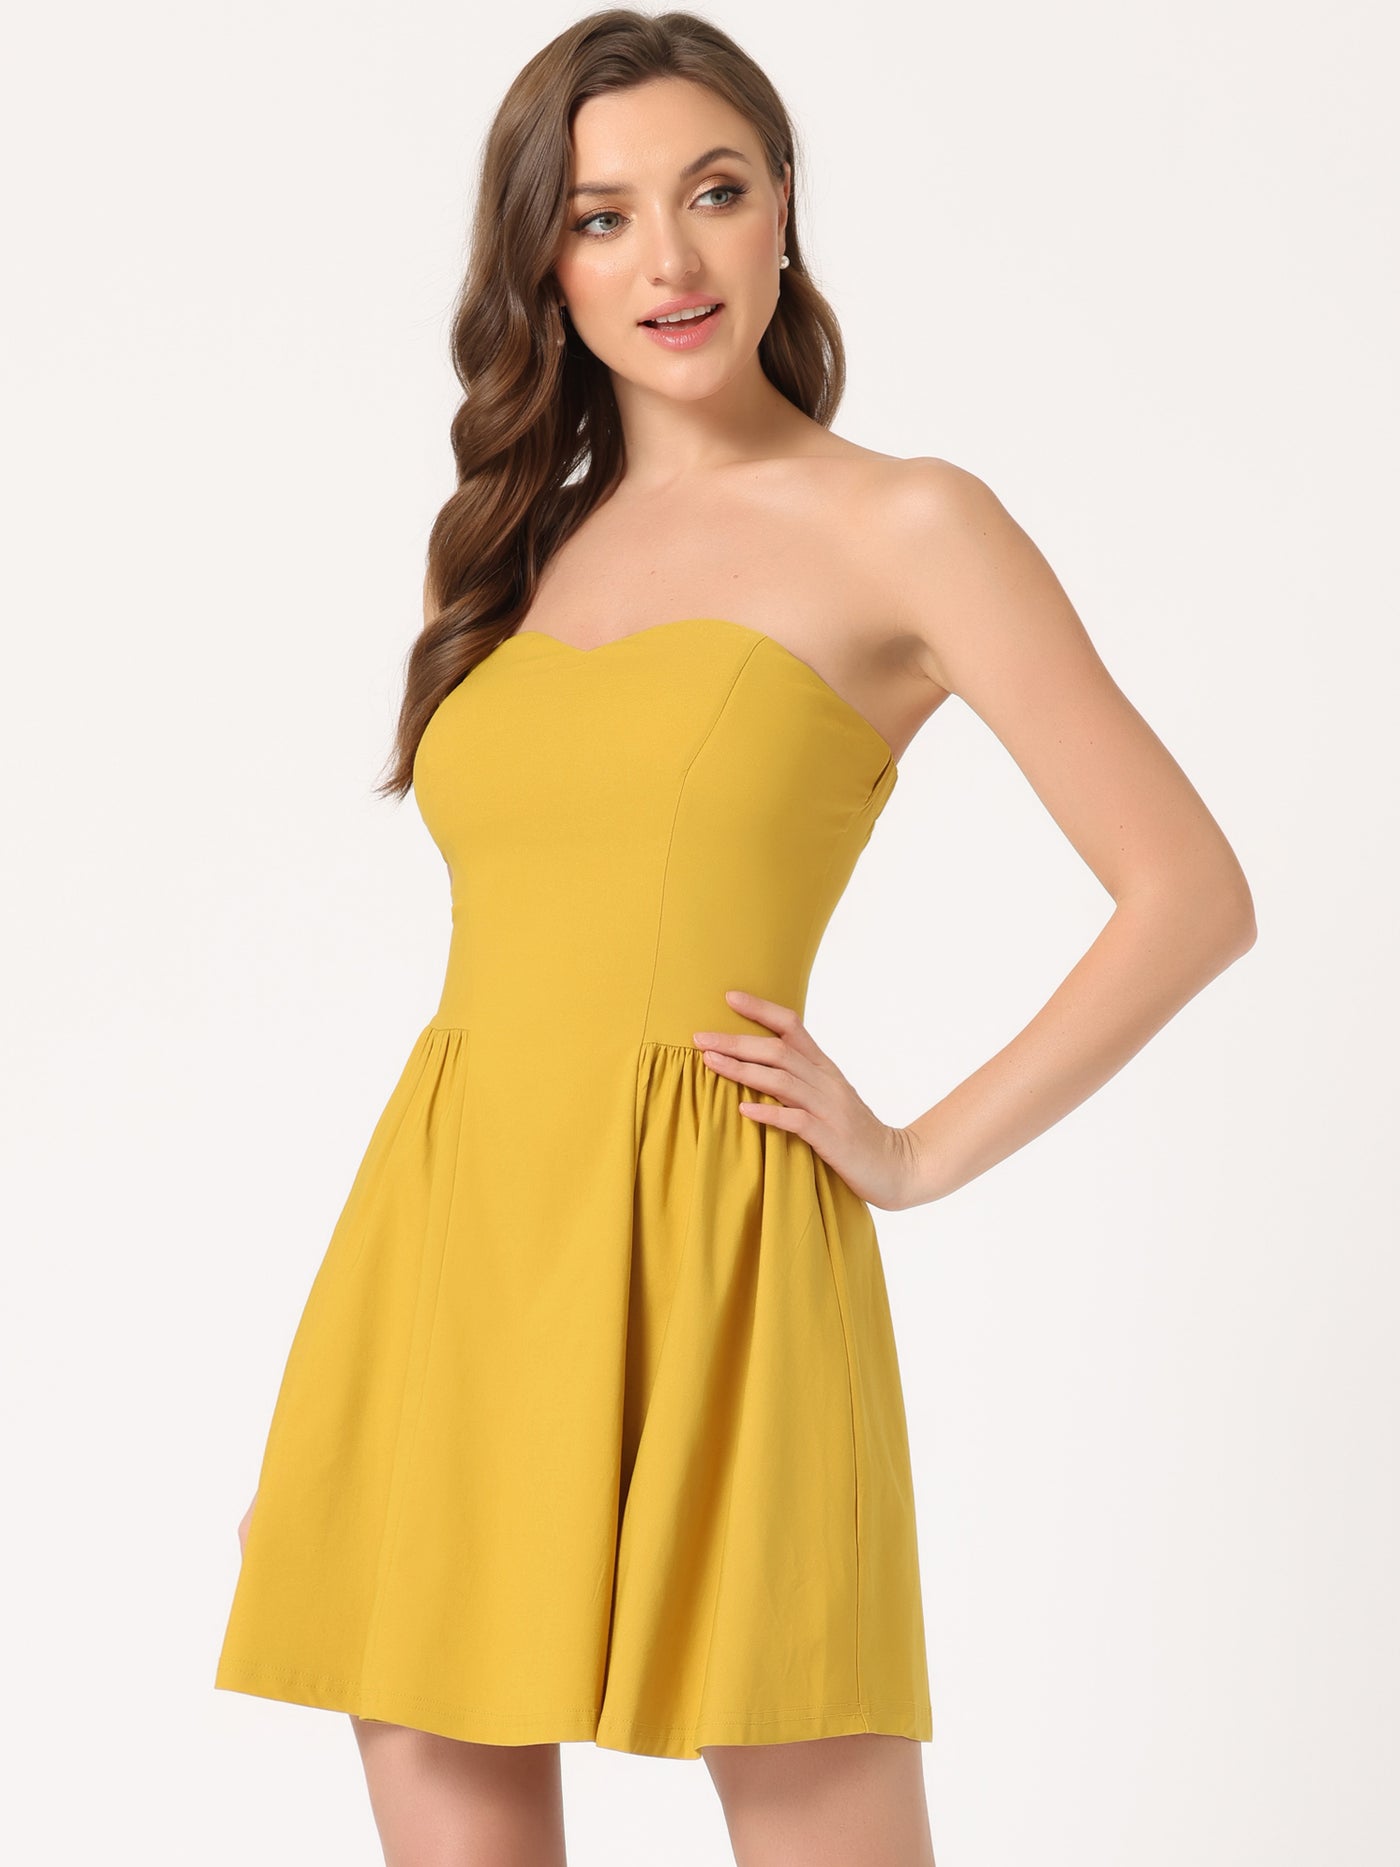 Allegra K Strapless Sweetheart Neck Fit And Flare Mini Tube Top Dress